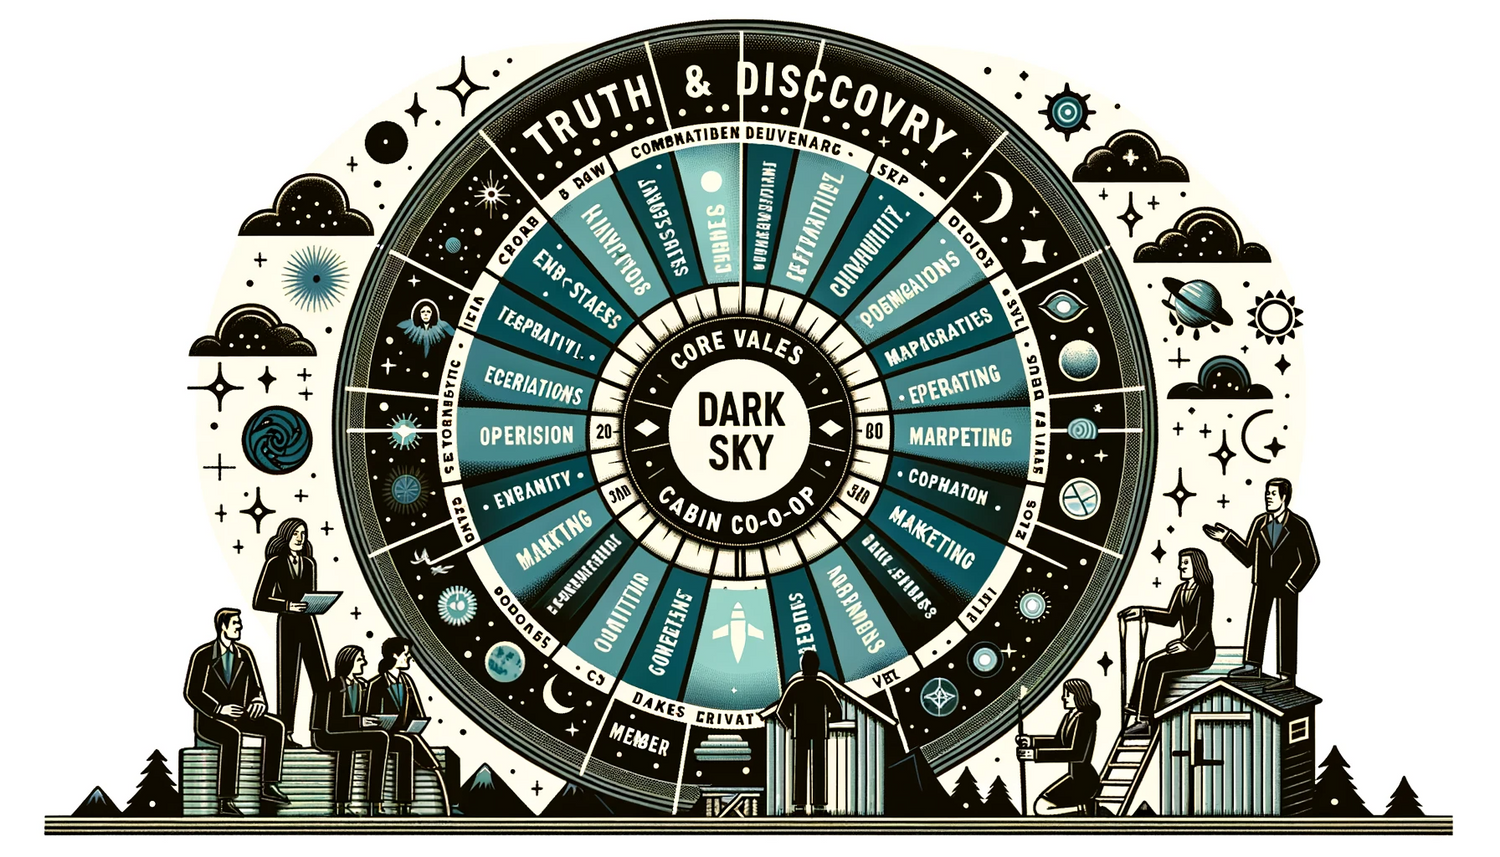  A stylized circular chart representing the 'DARK SKY CABIN CO-OP,' featuring sections for core values, operational roles, and other aspects of the organization, all adorned with celestial bodies and figures seated and standing on steps and platforms, set against a night sky theme.